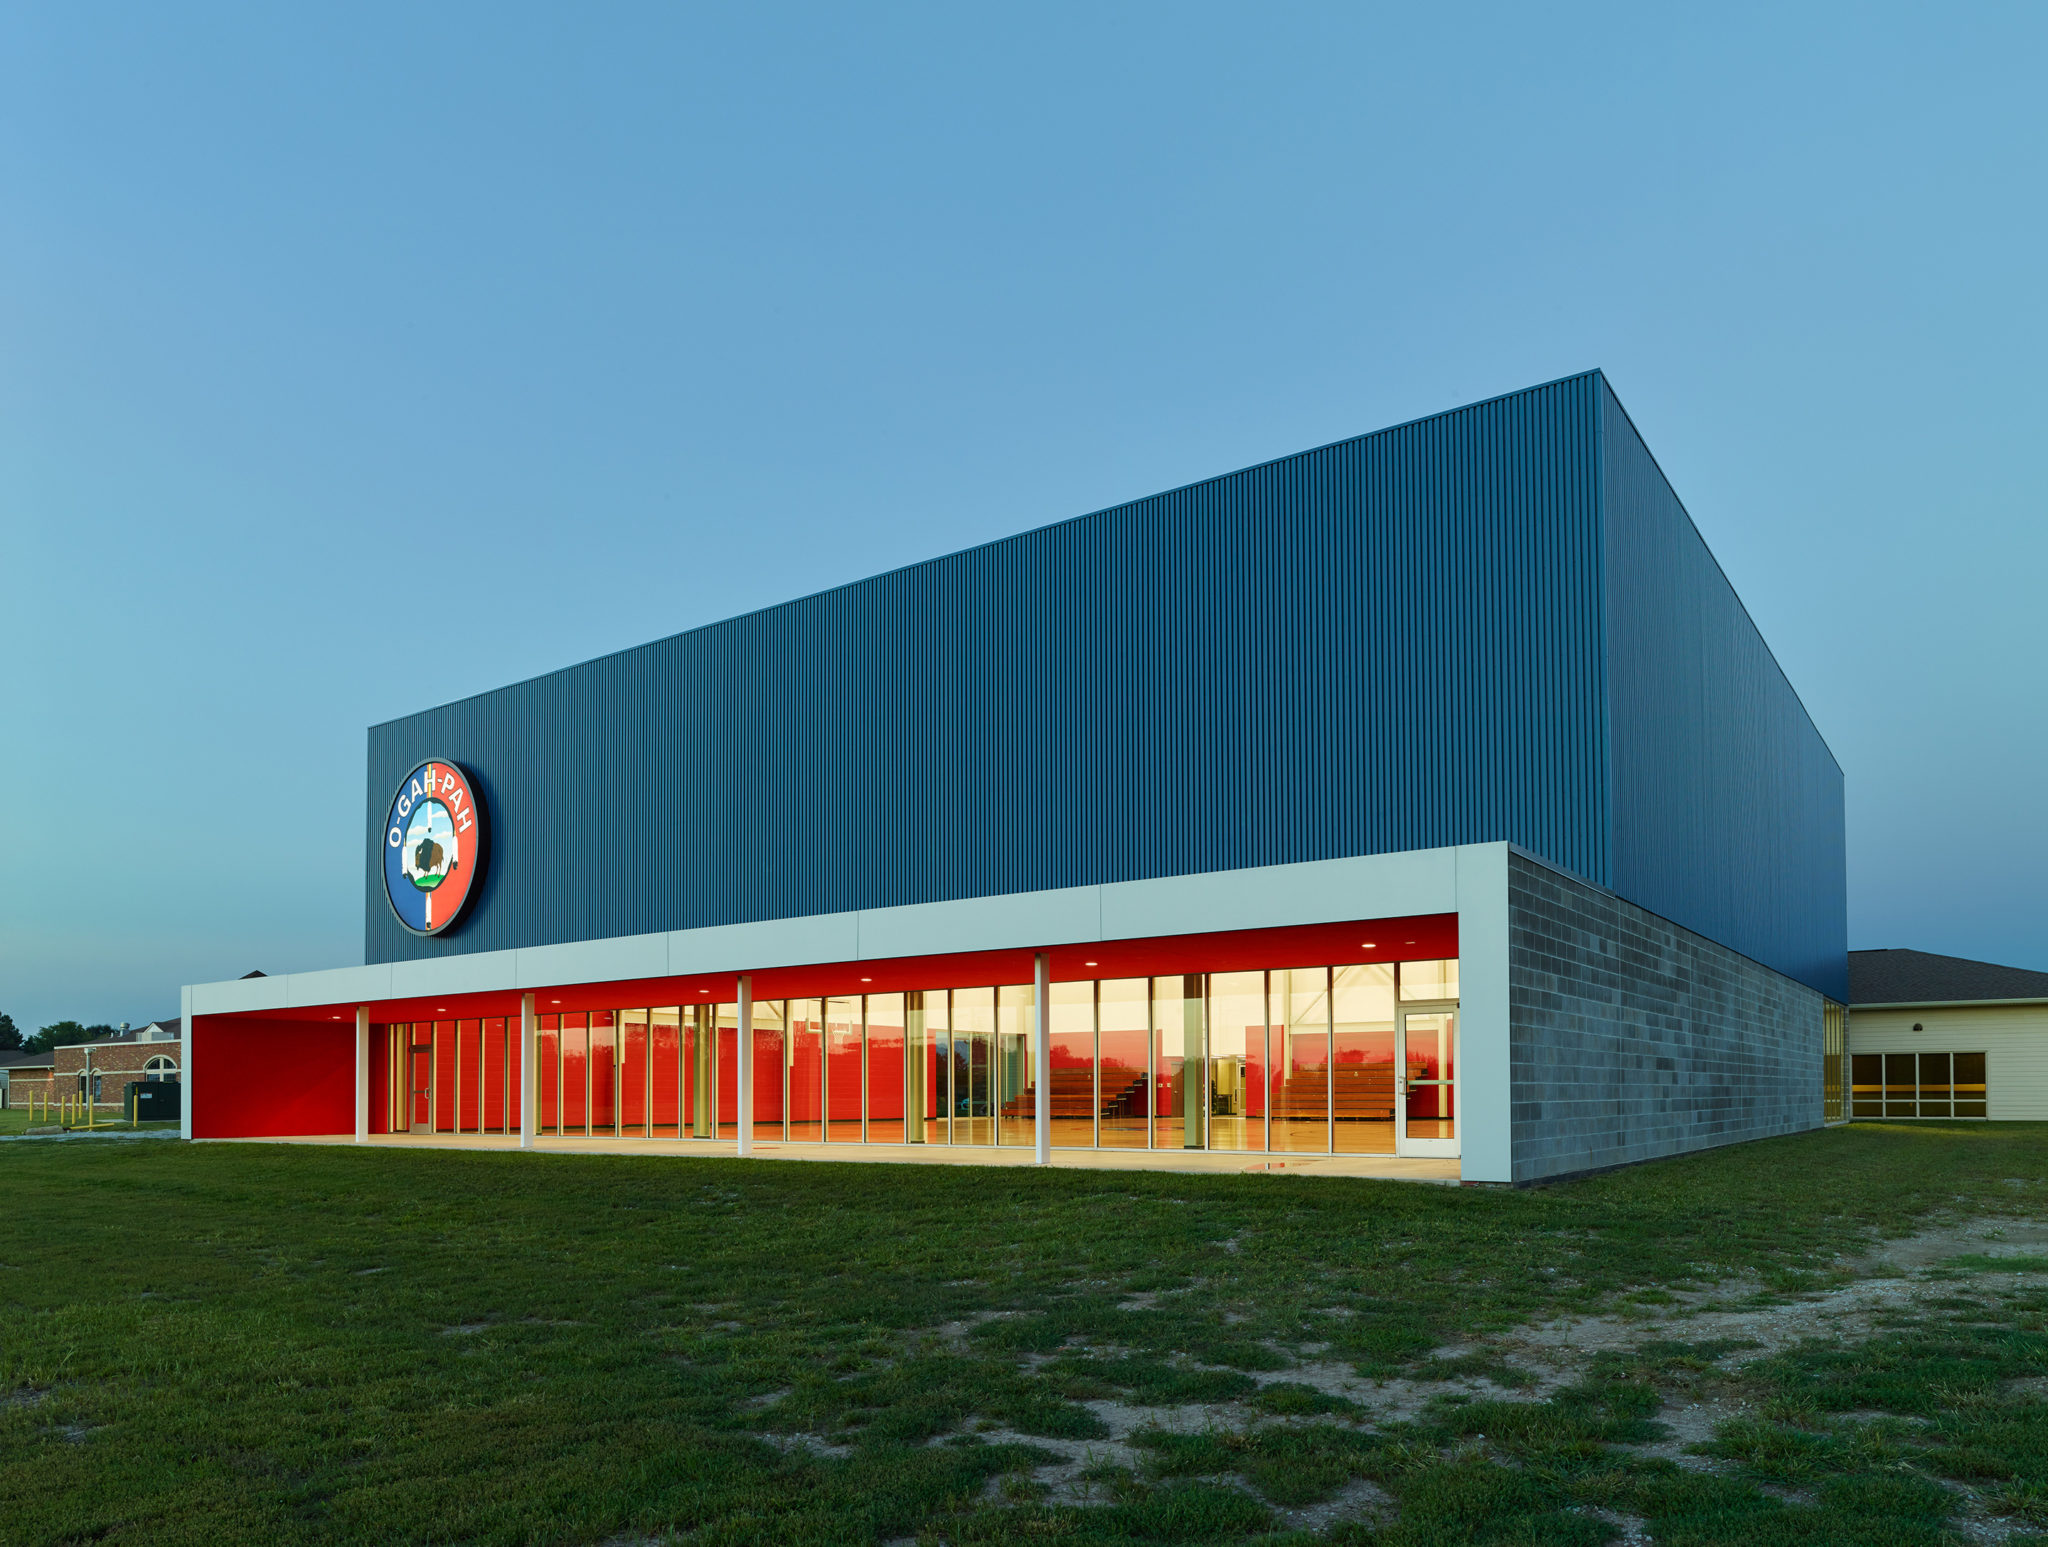 The exterior shows red stucco that spans the length of the gym with large blue volume, clad in a prefinished box rib panel